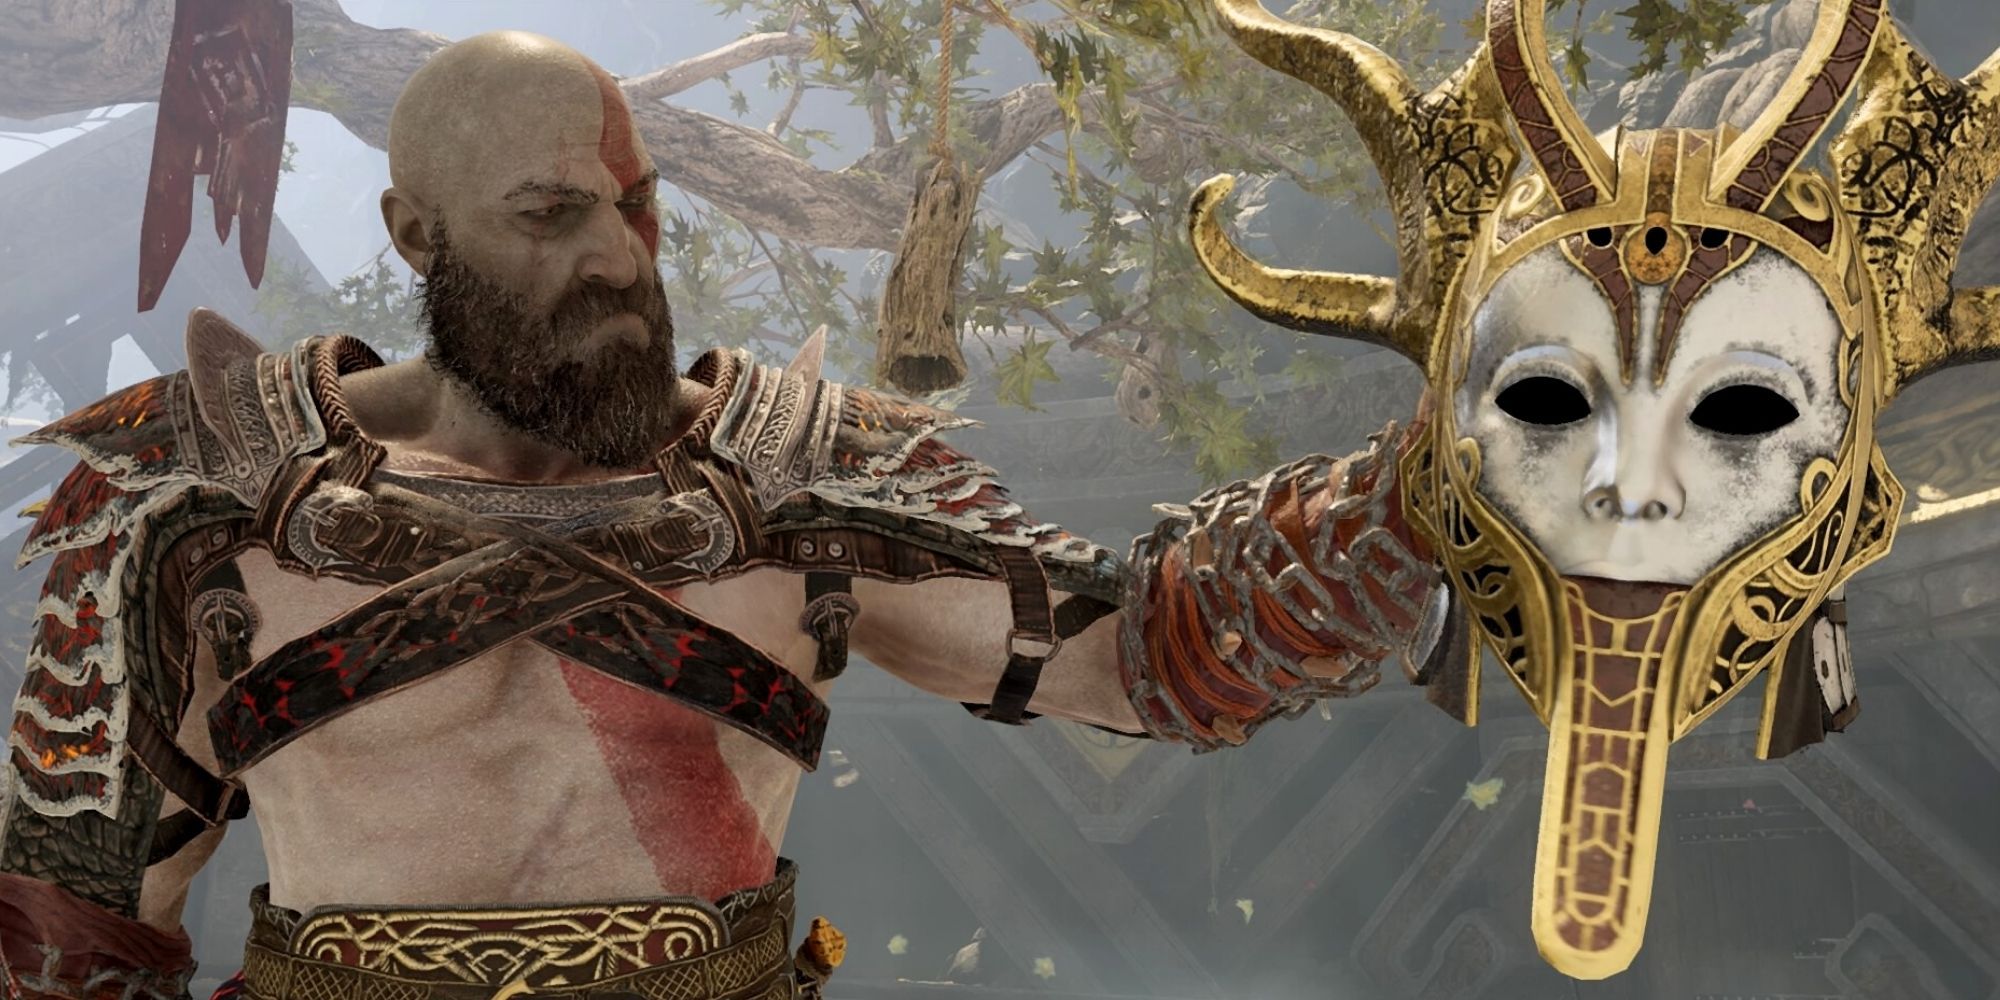 Kratos wields the mask of the valkyrie Rota